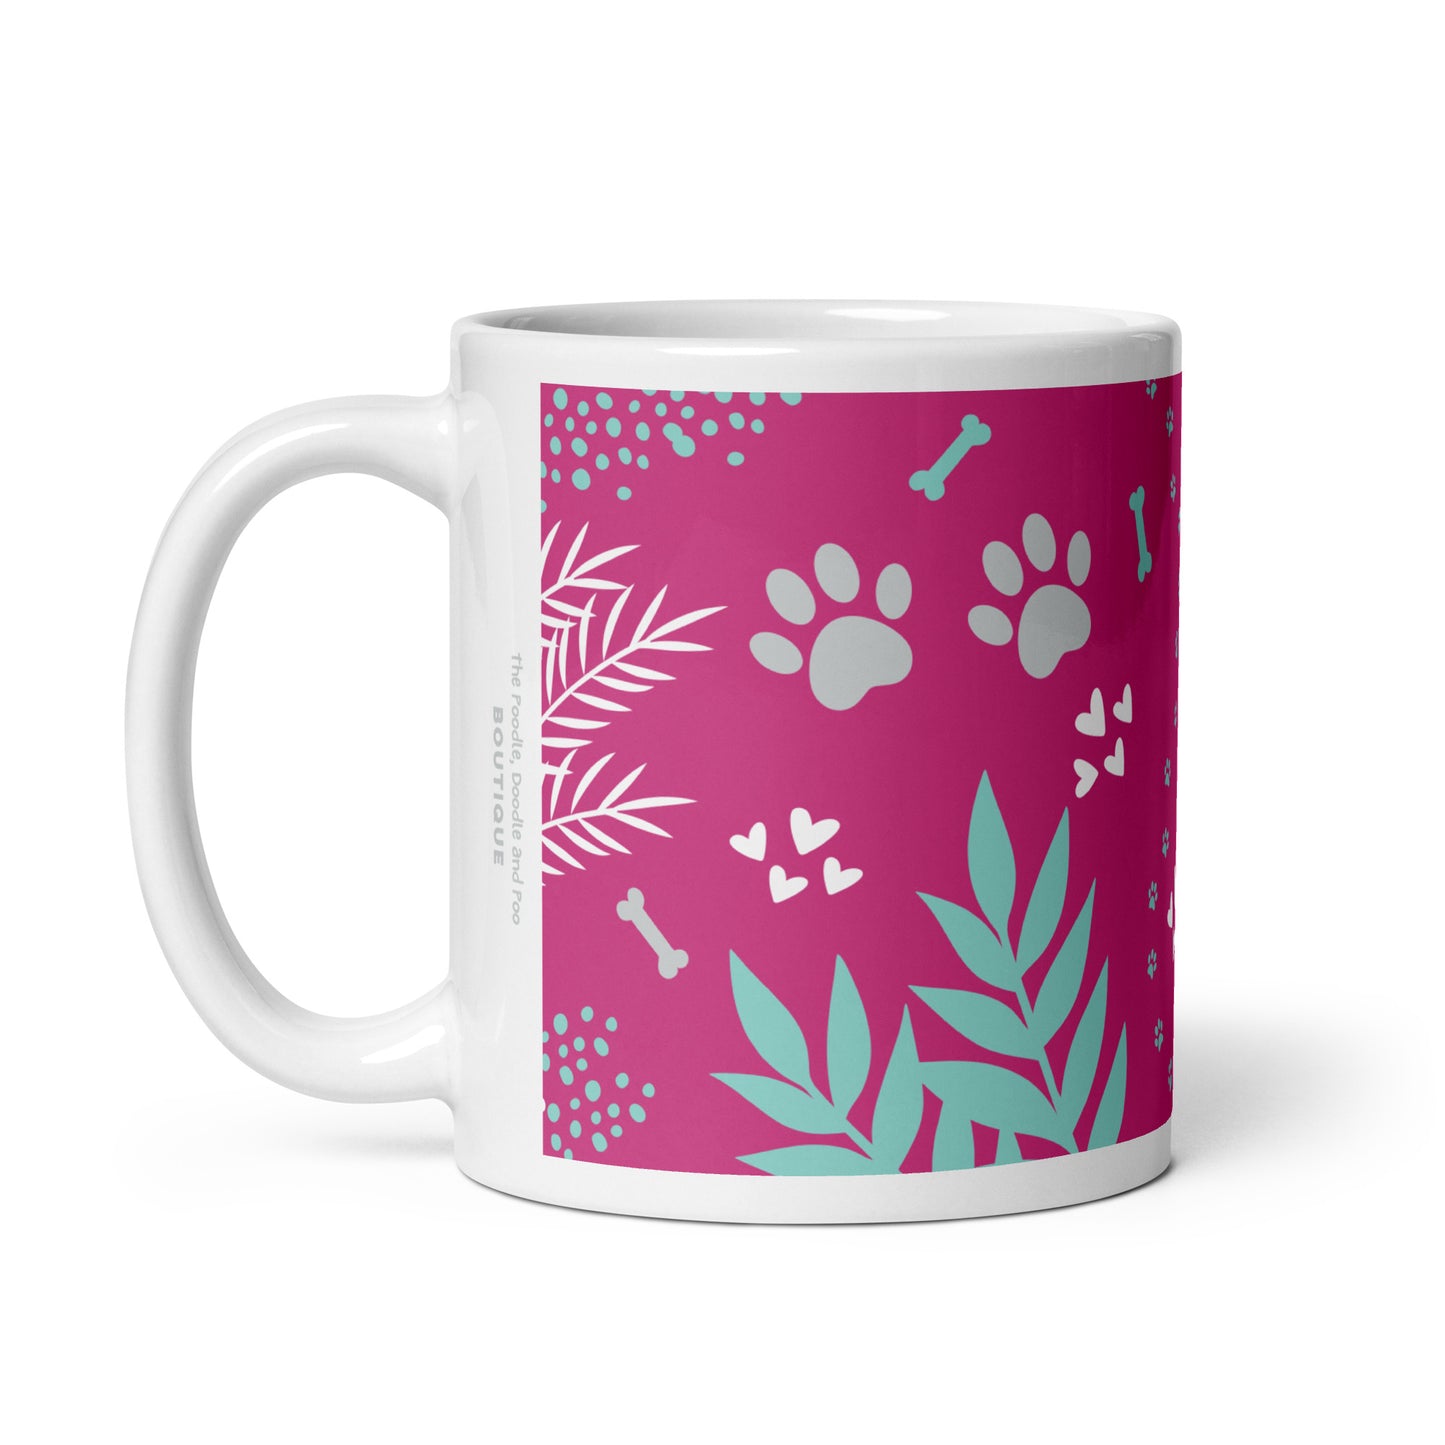 Signature Collection glossy mug in pink